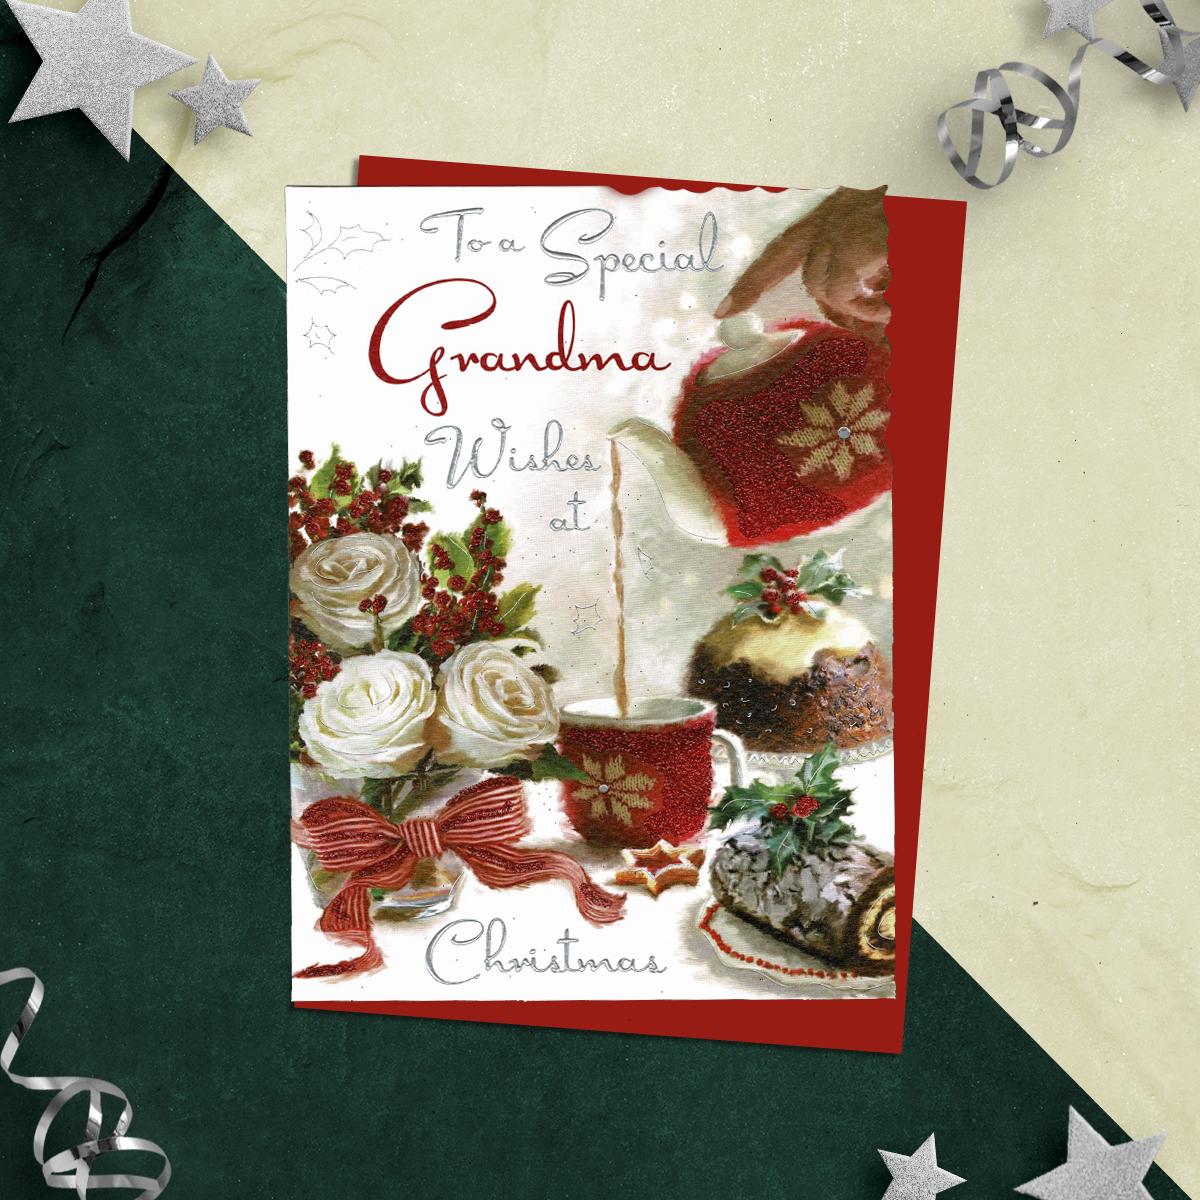 To A Special Grandma Wishes At Christmas Featuring Tea Being Poured And Christmas Cake! Finished With Silver Foiled And Red Lettering, Red Glitter And Red Envelope